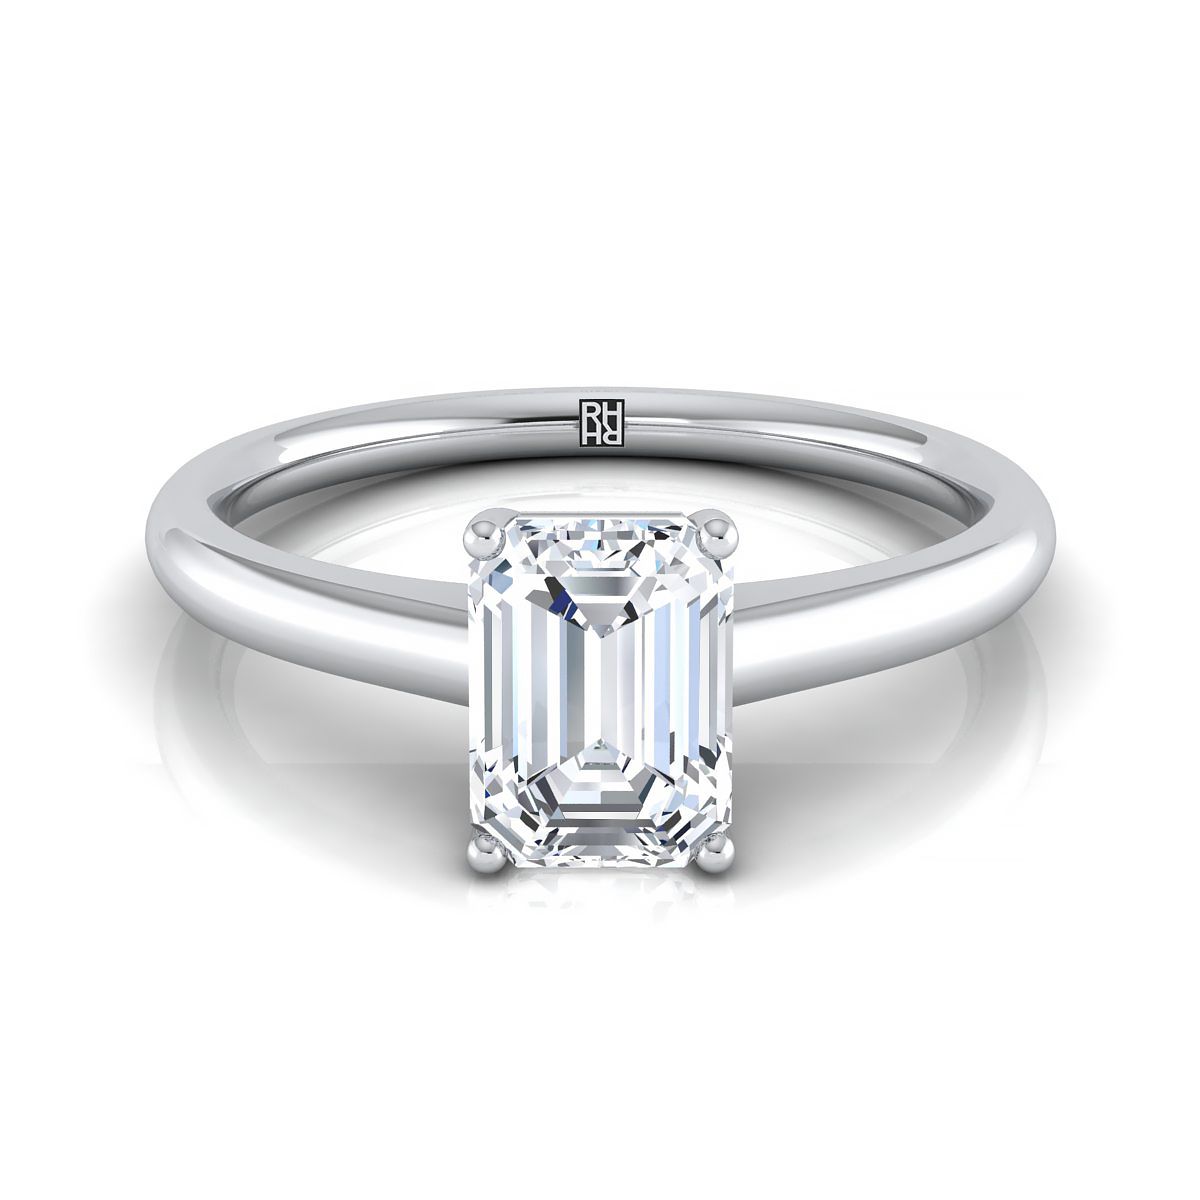 18K White Gold Emerald Cut Contemporary Comfort Fit Solitaire Engagement Ring